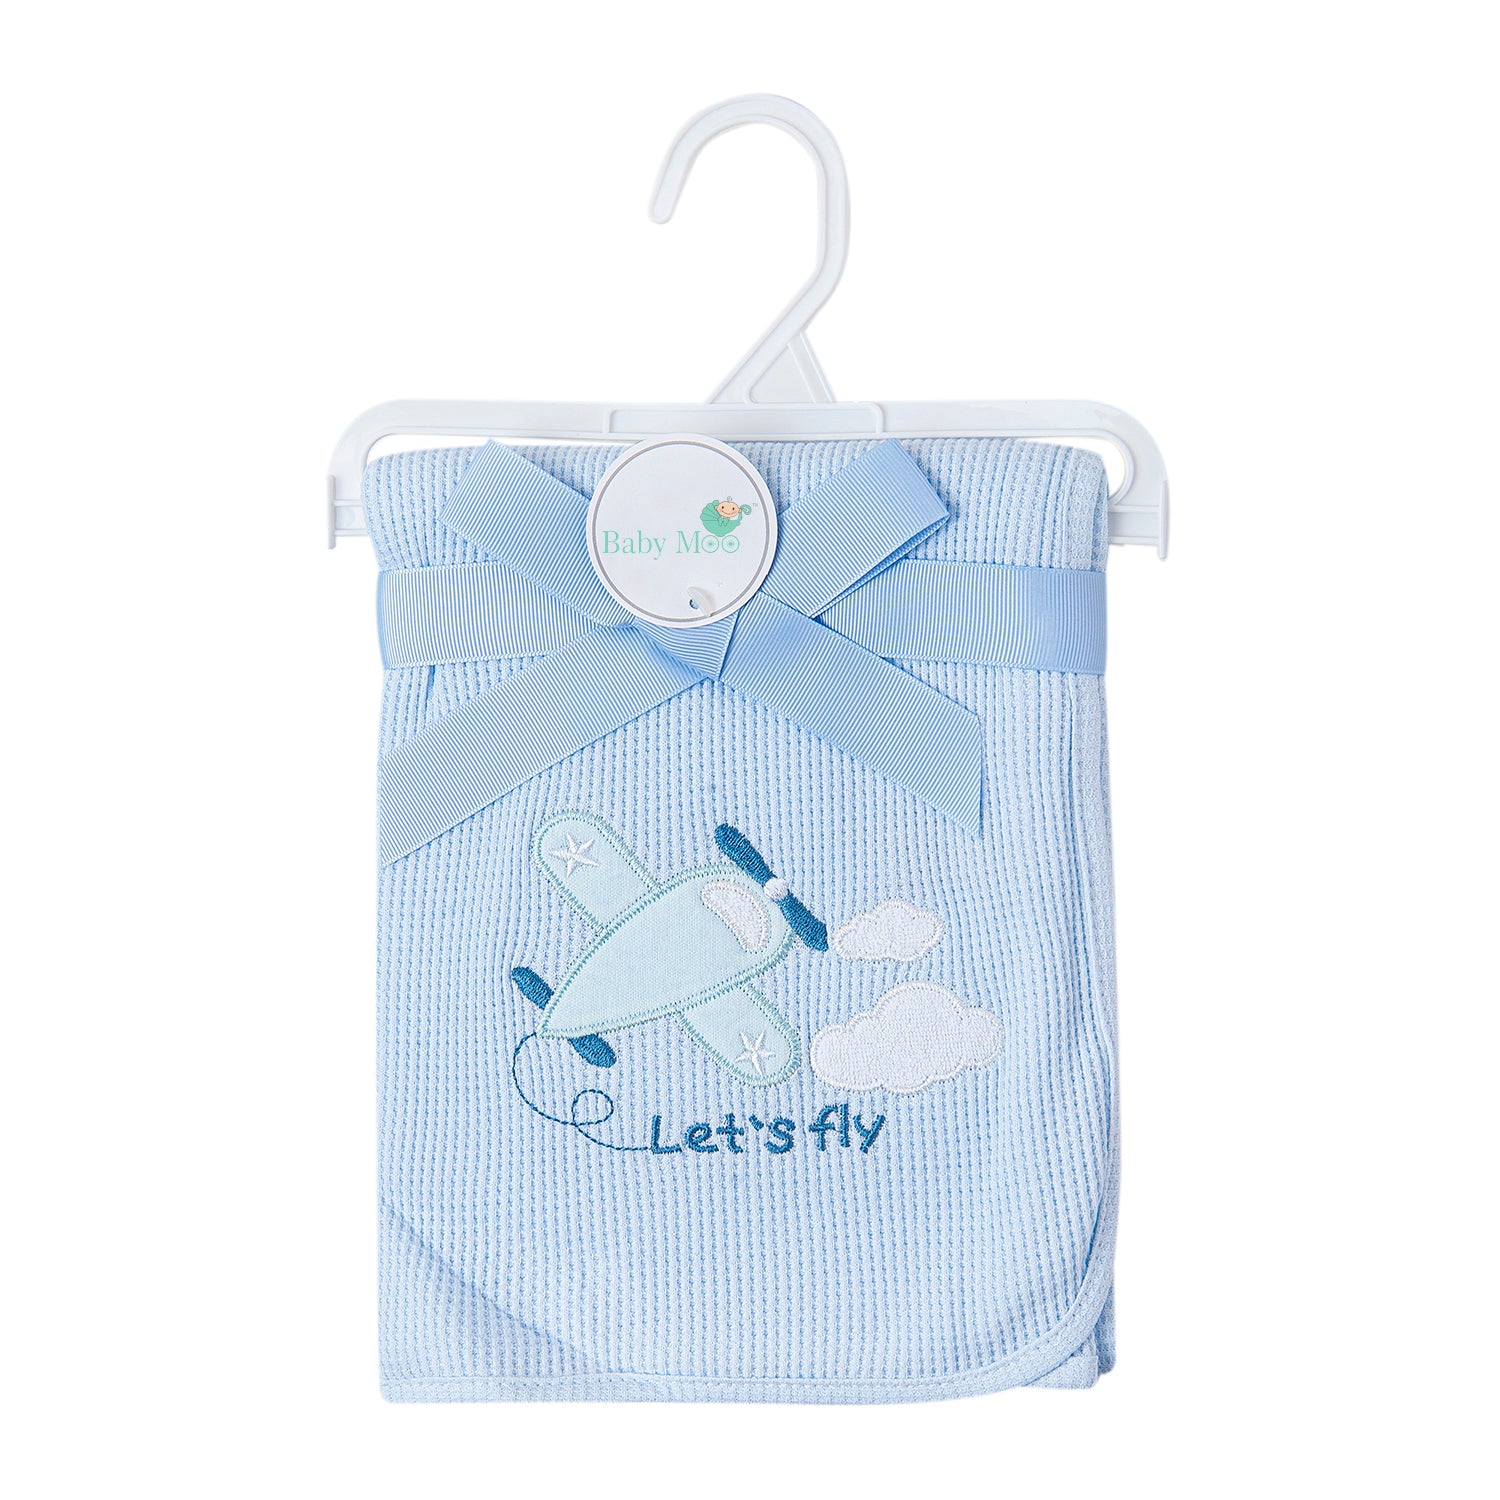 Let's Fly Light Waffle Blanket Blue - Baby Moo